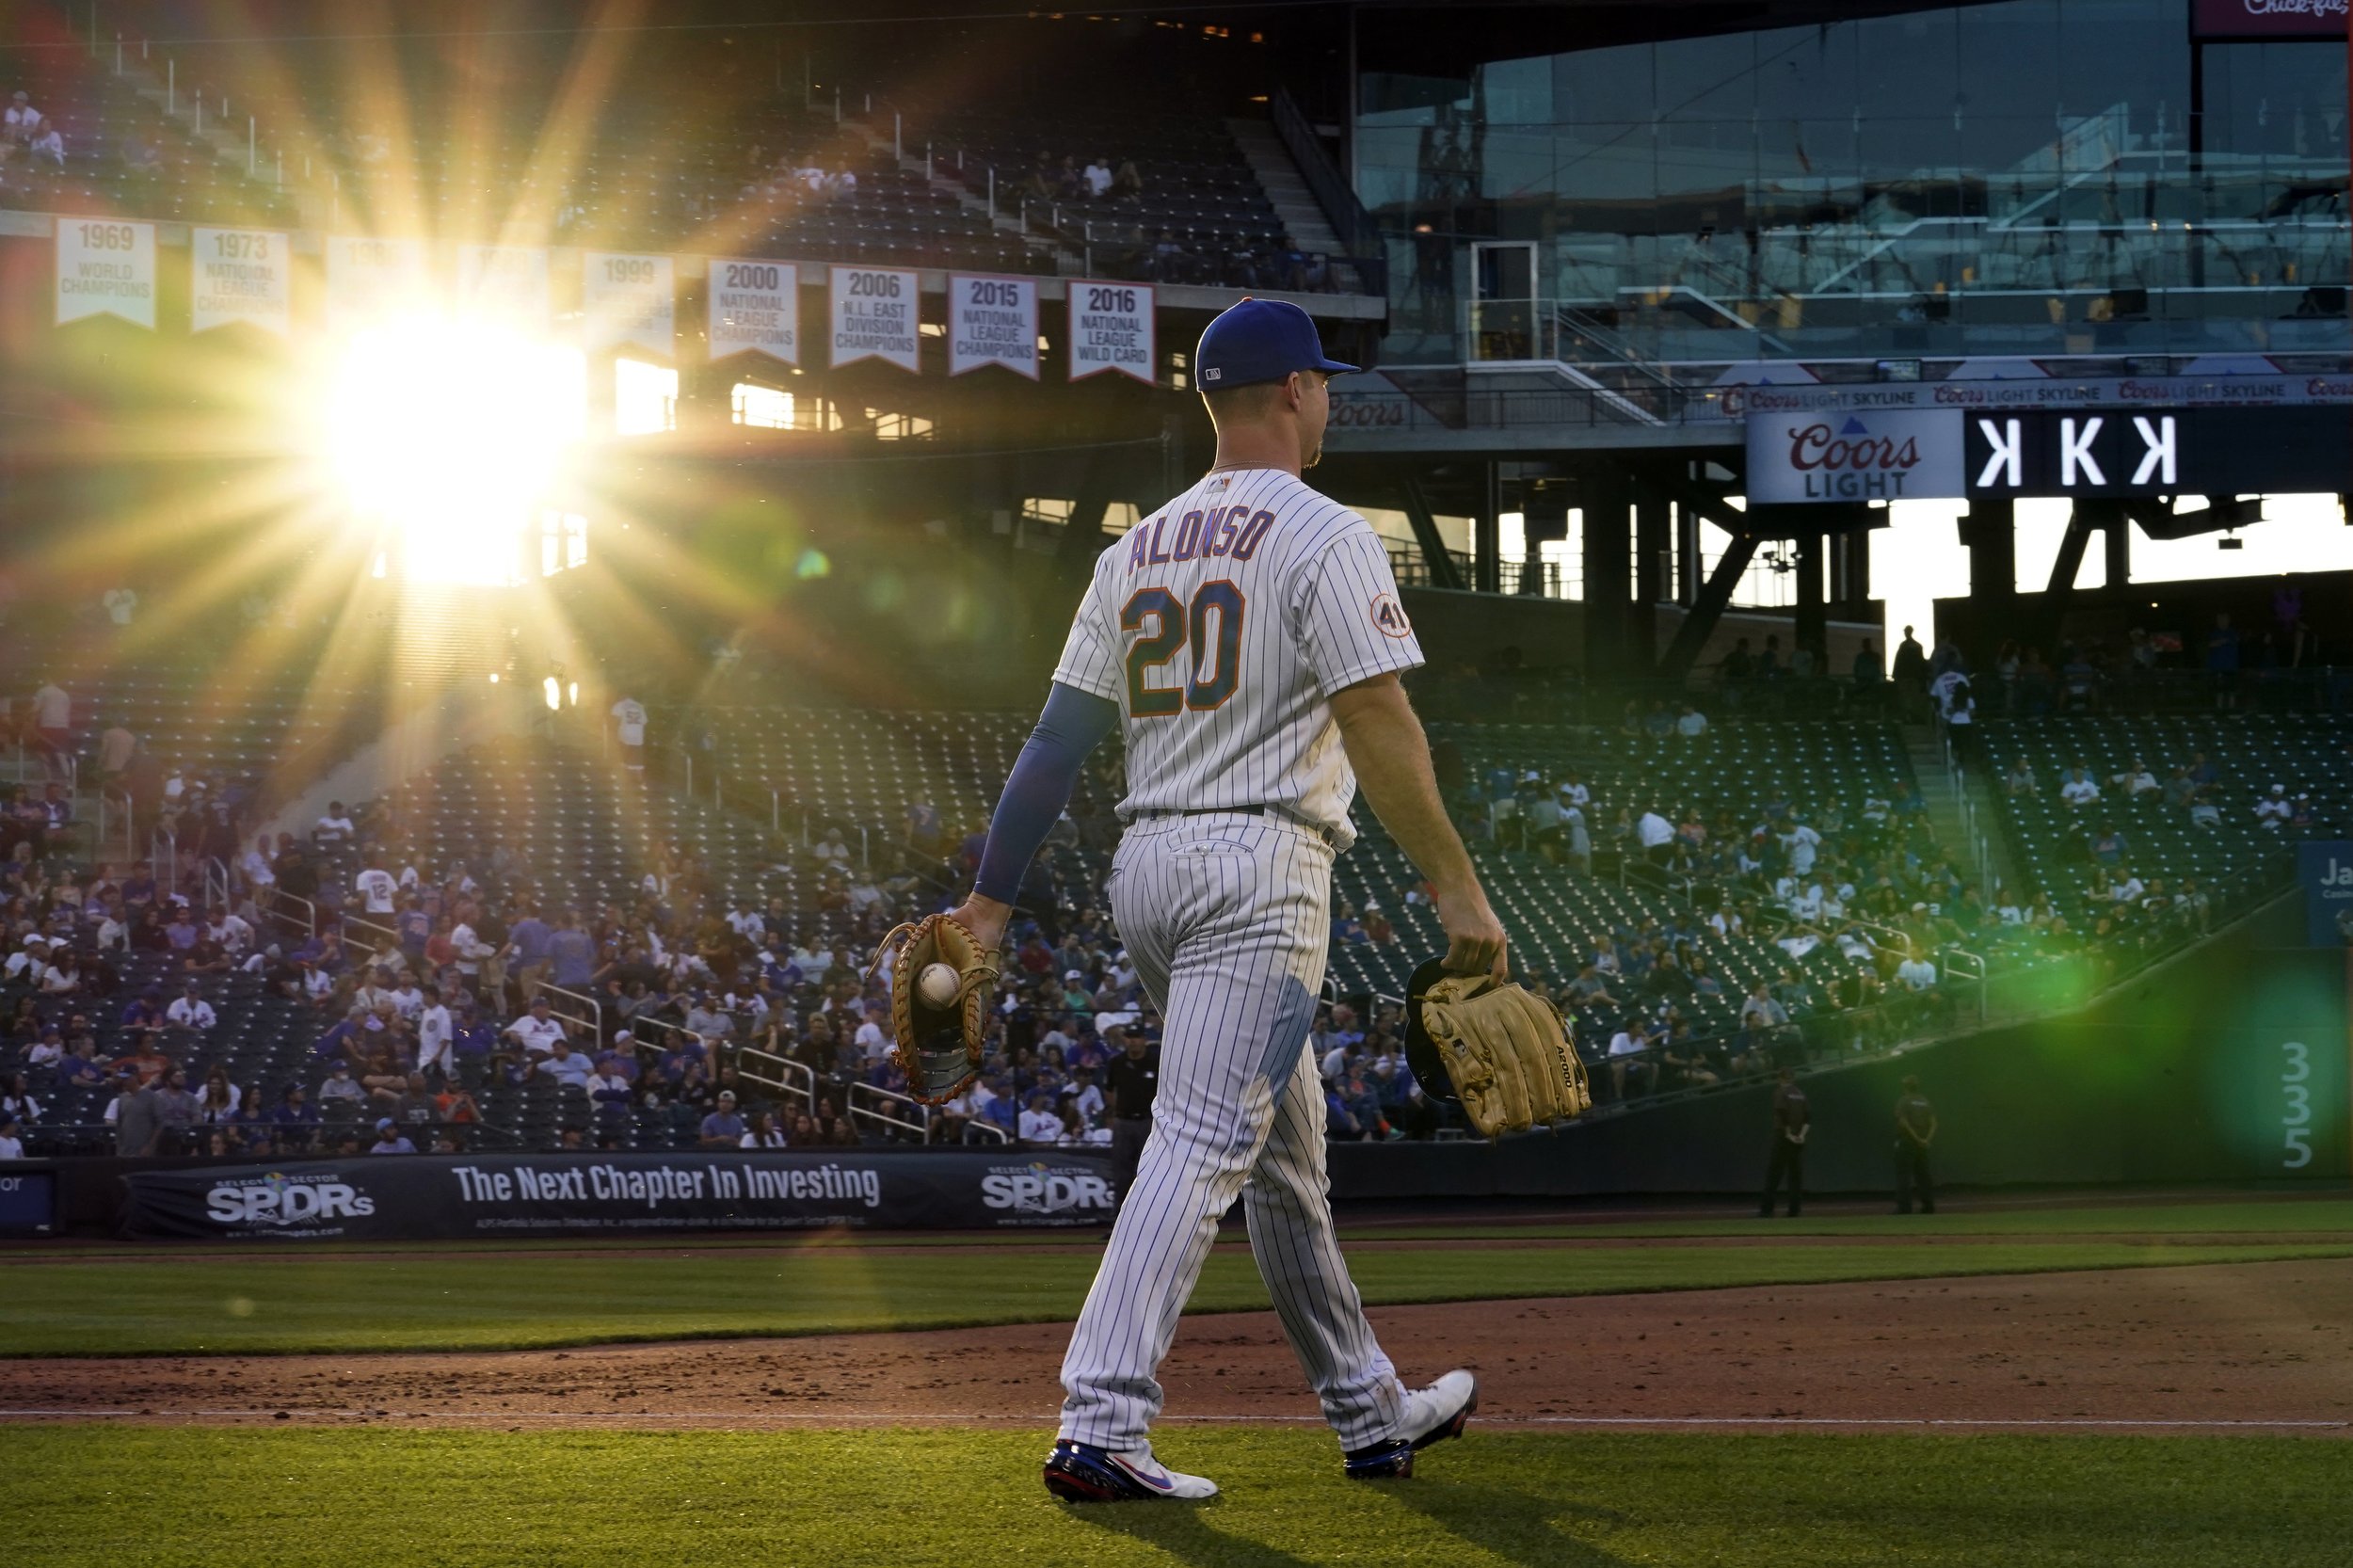  New York Mets first baseman Pete Alonso walks to his position between innings of the team's baseball game against the Chicago Cubs on June 17, 2021, in New York. (AP Photo/Kathy Willens) 